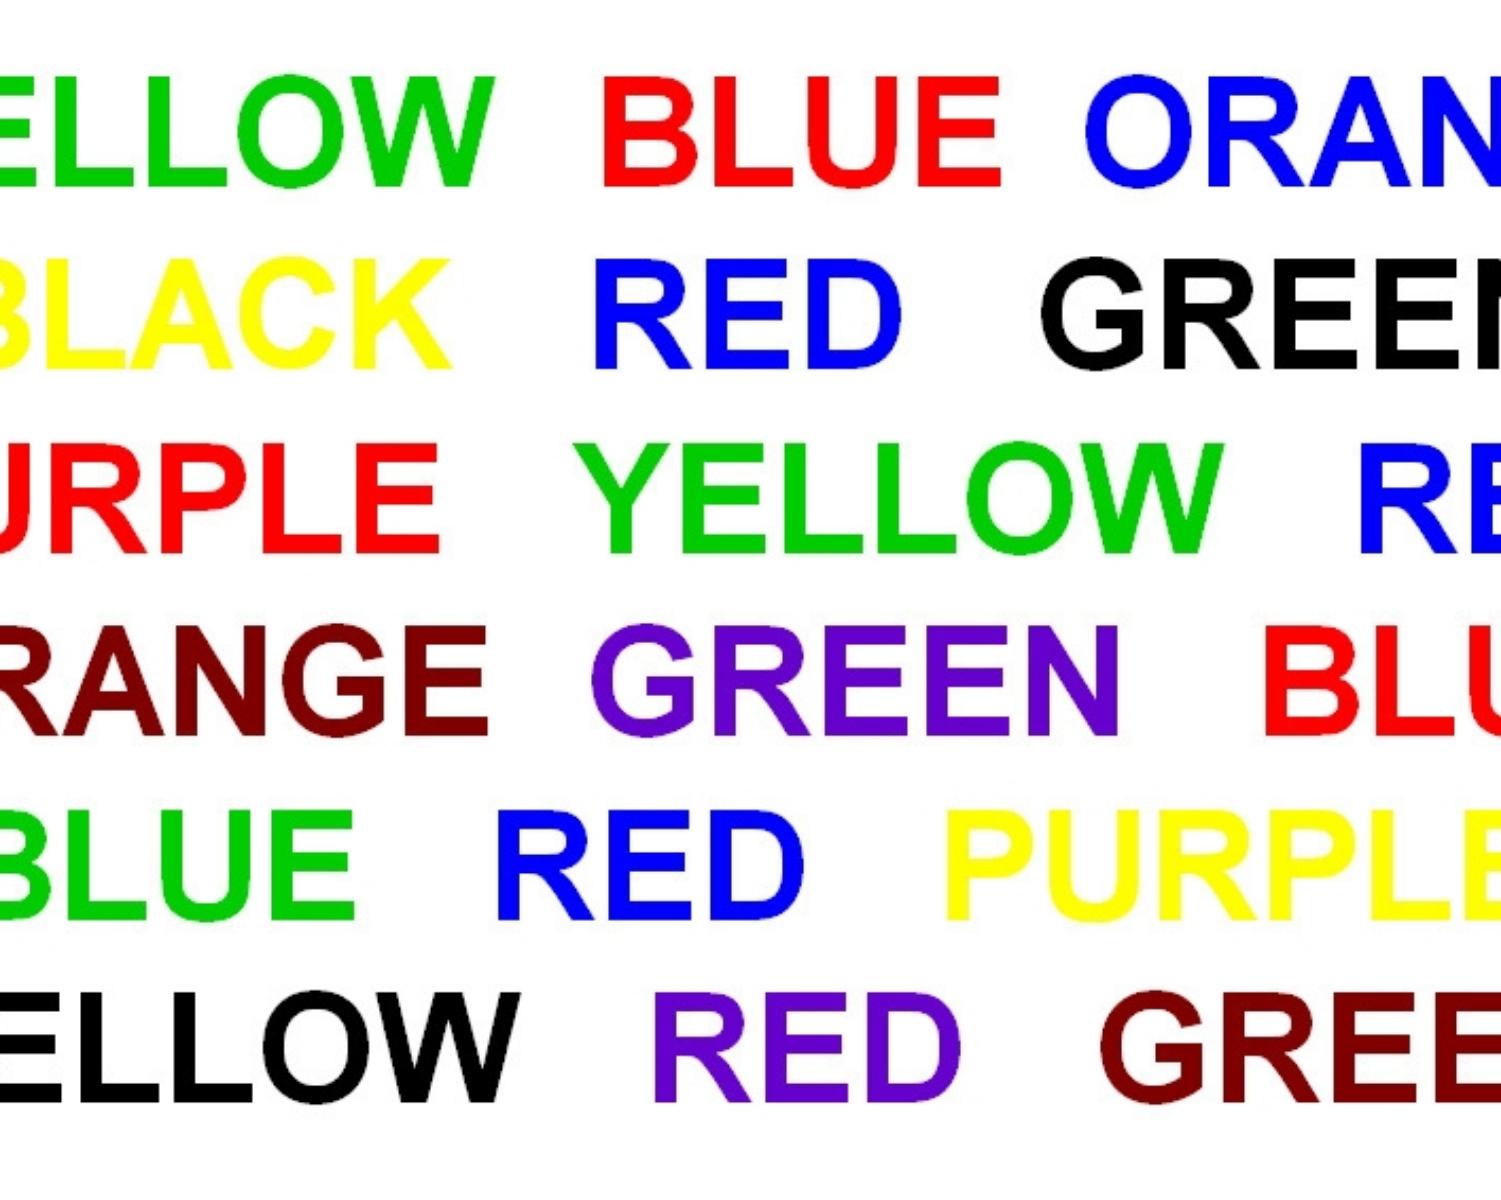 What is Stroop effect?